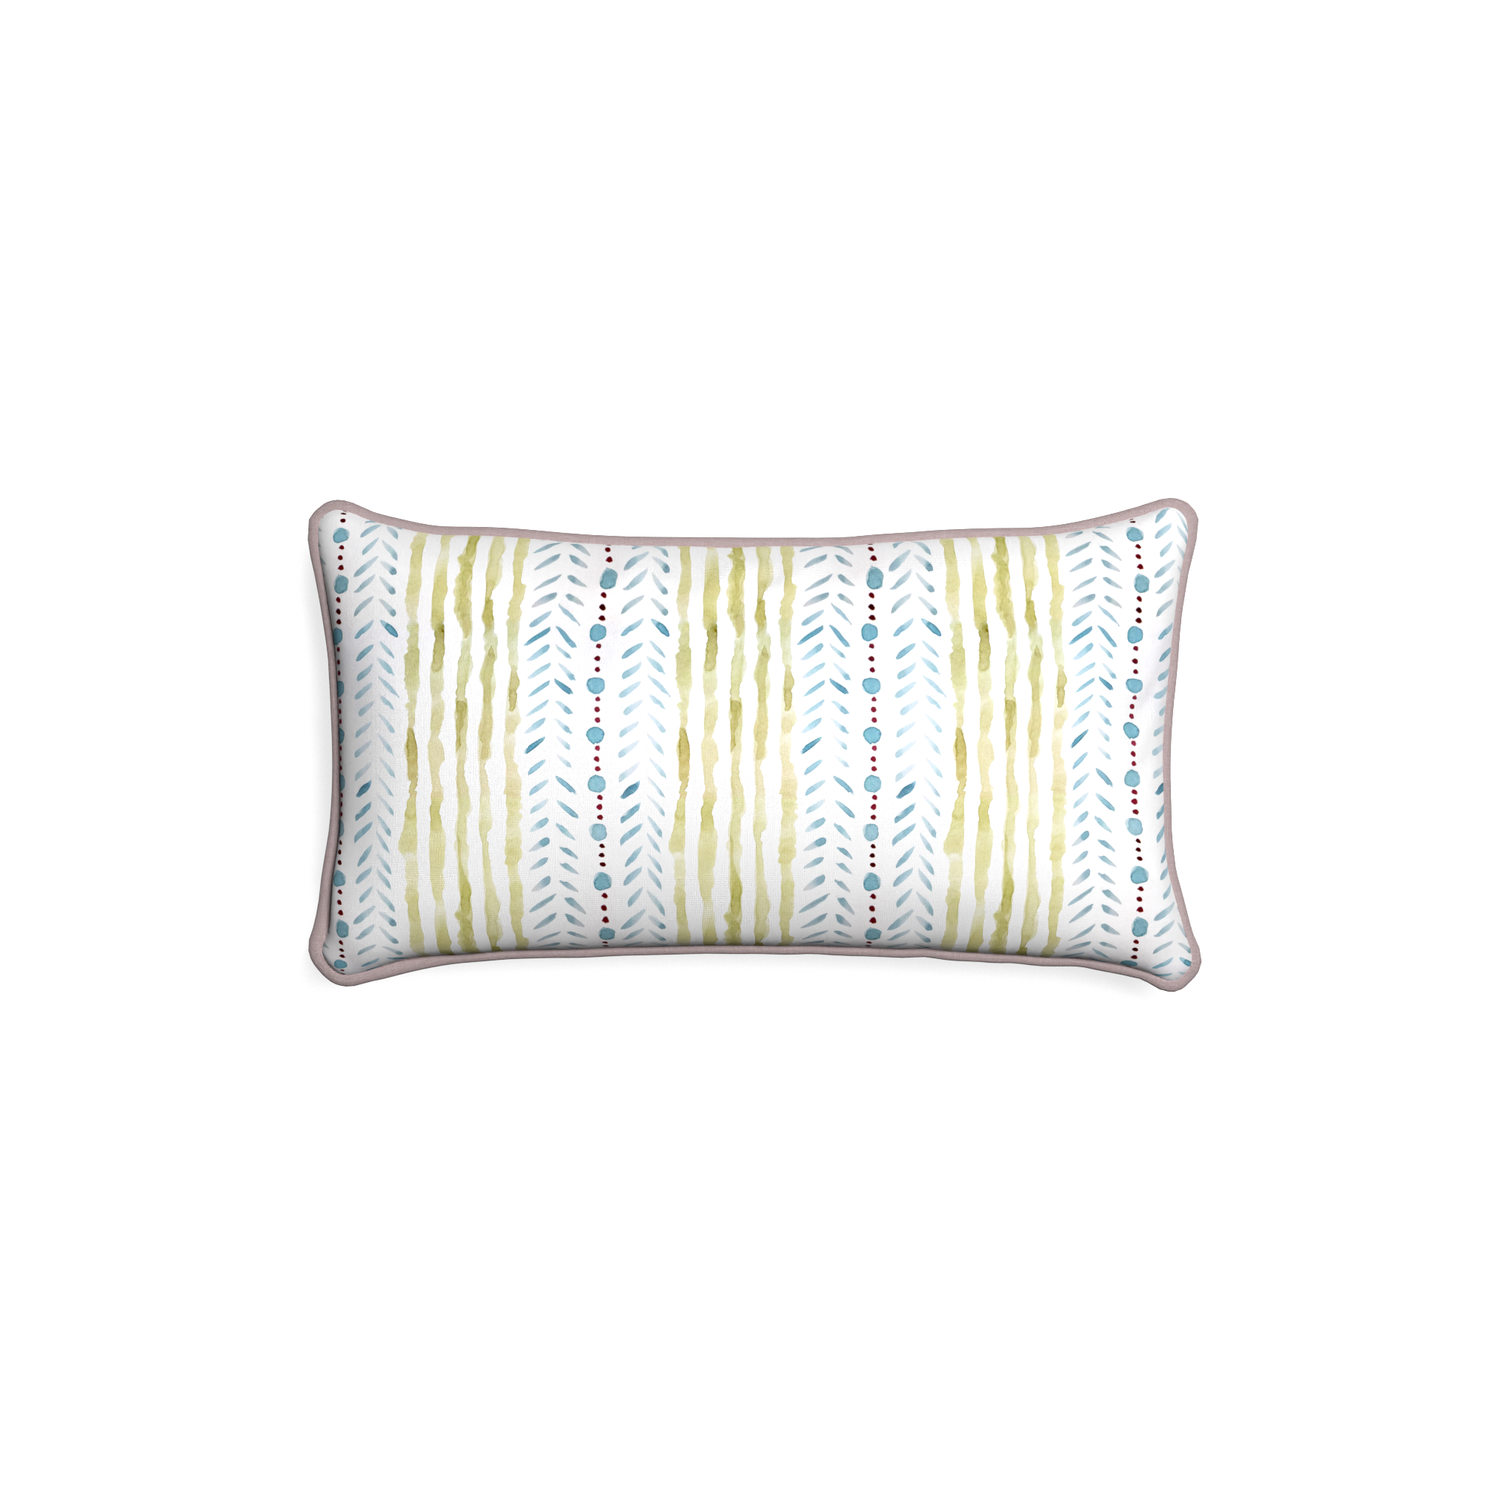 Petite-lumbar julia custom blue & green stripedpillow with orchid piping on white background